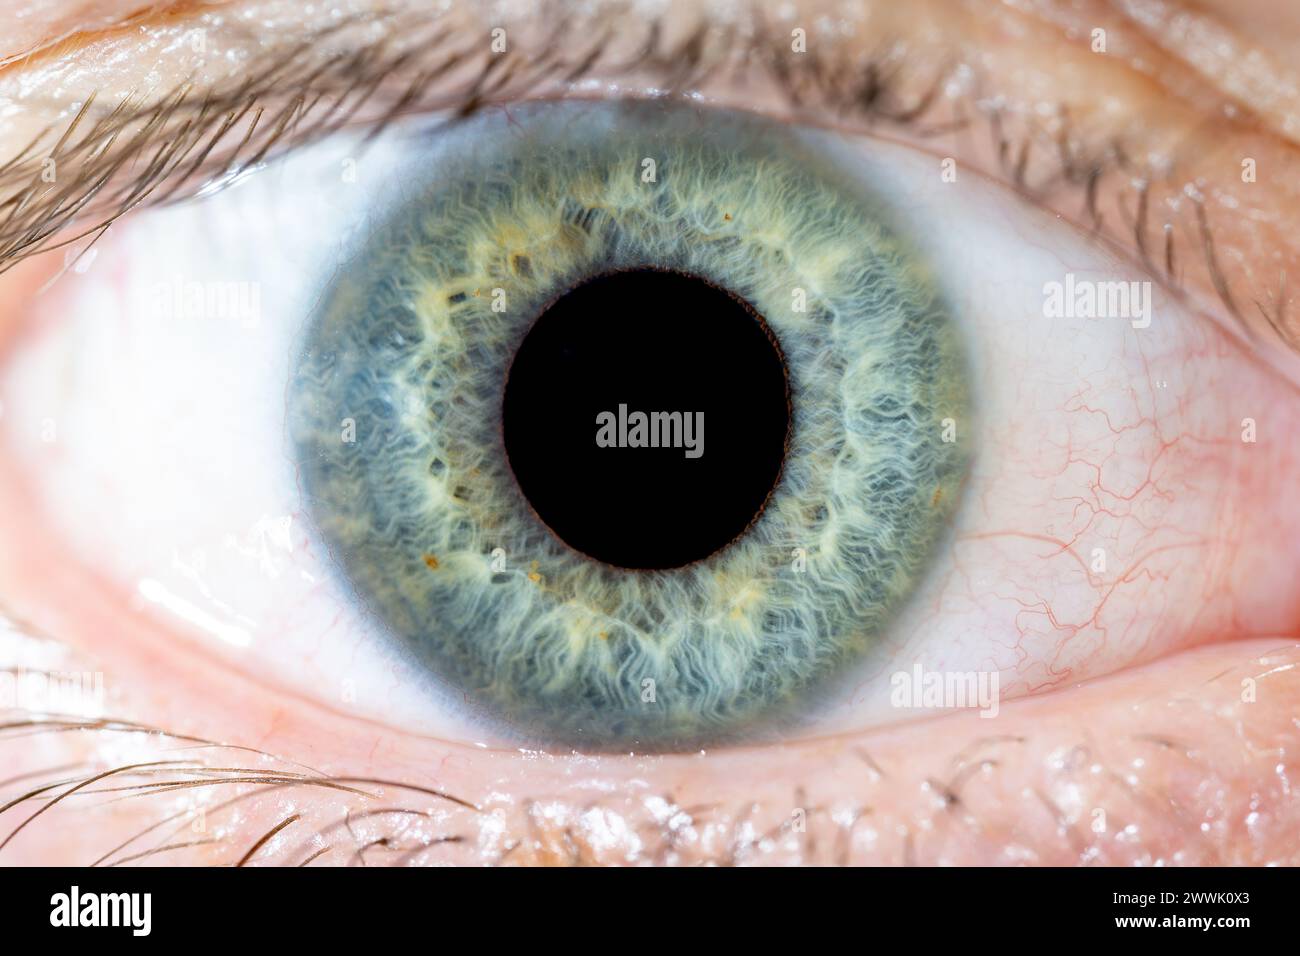 Description: High magnification of Male Blue-Green Colored Eye With Lashes. Pupil Wide Opened. Close Up. Structural Anatomy. Human Iris Macro Detail. Stock Photo